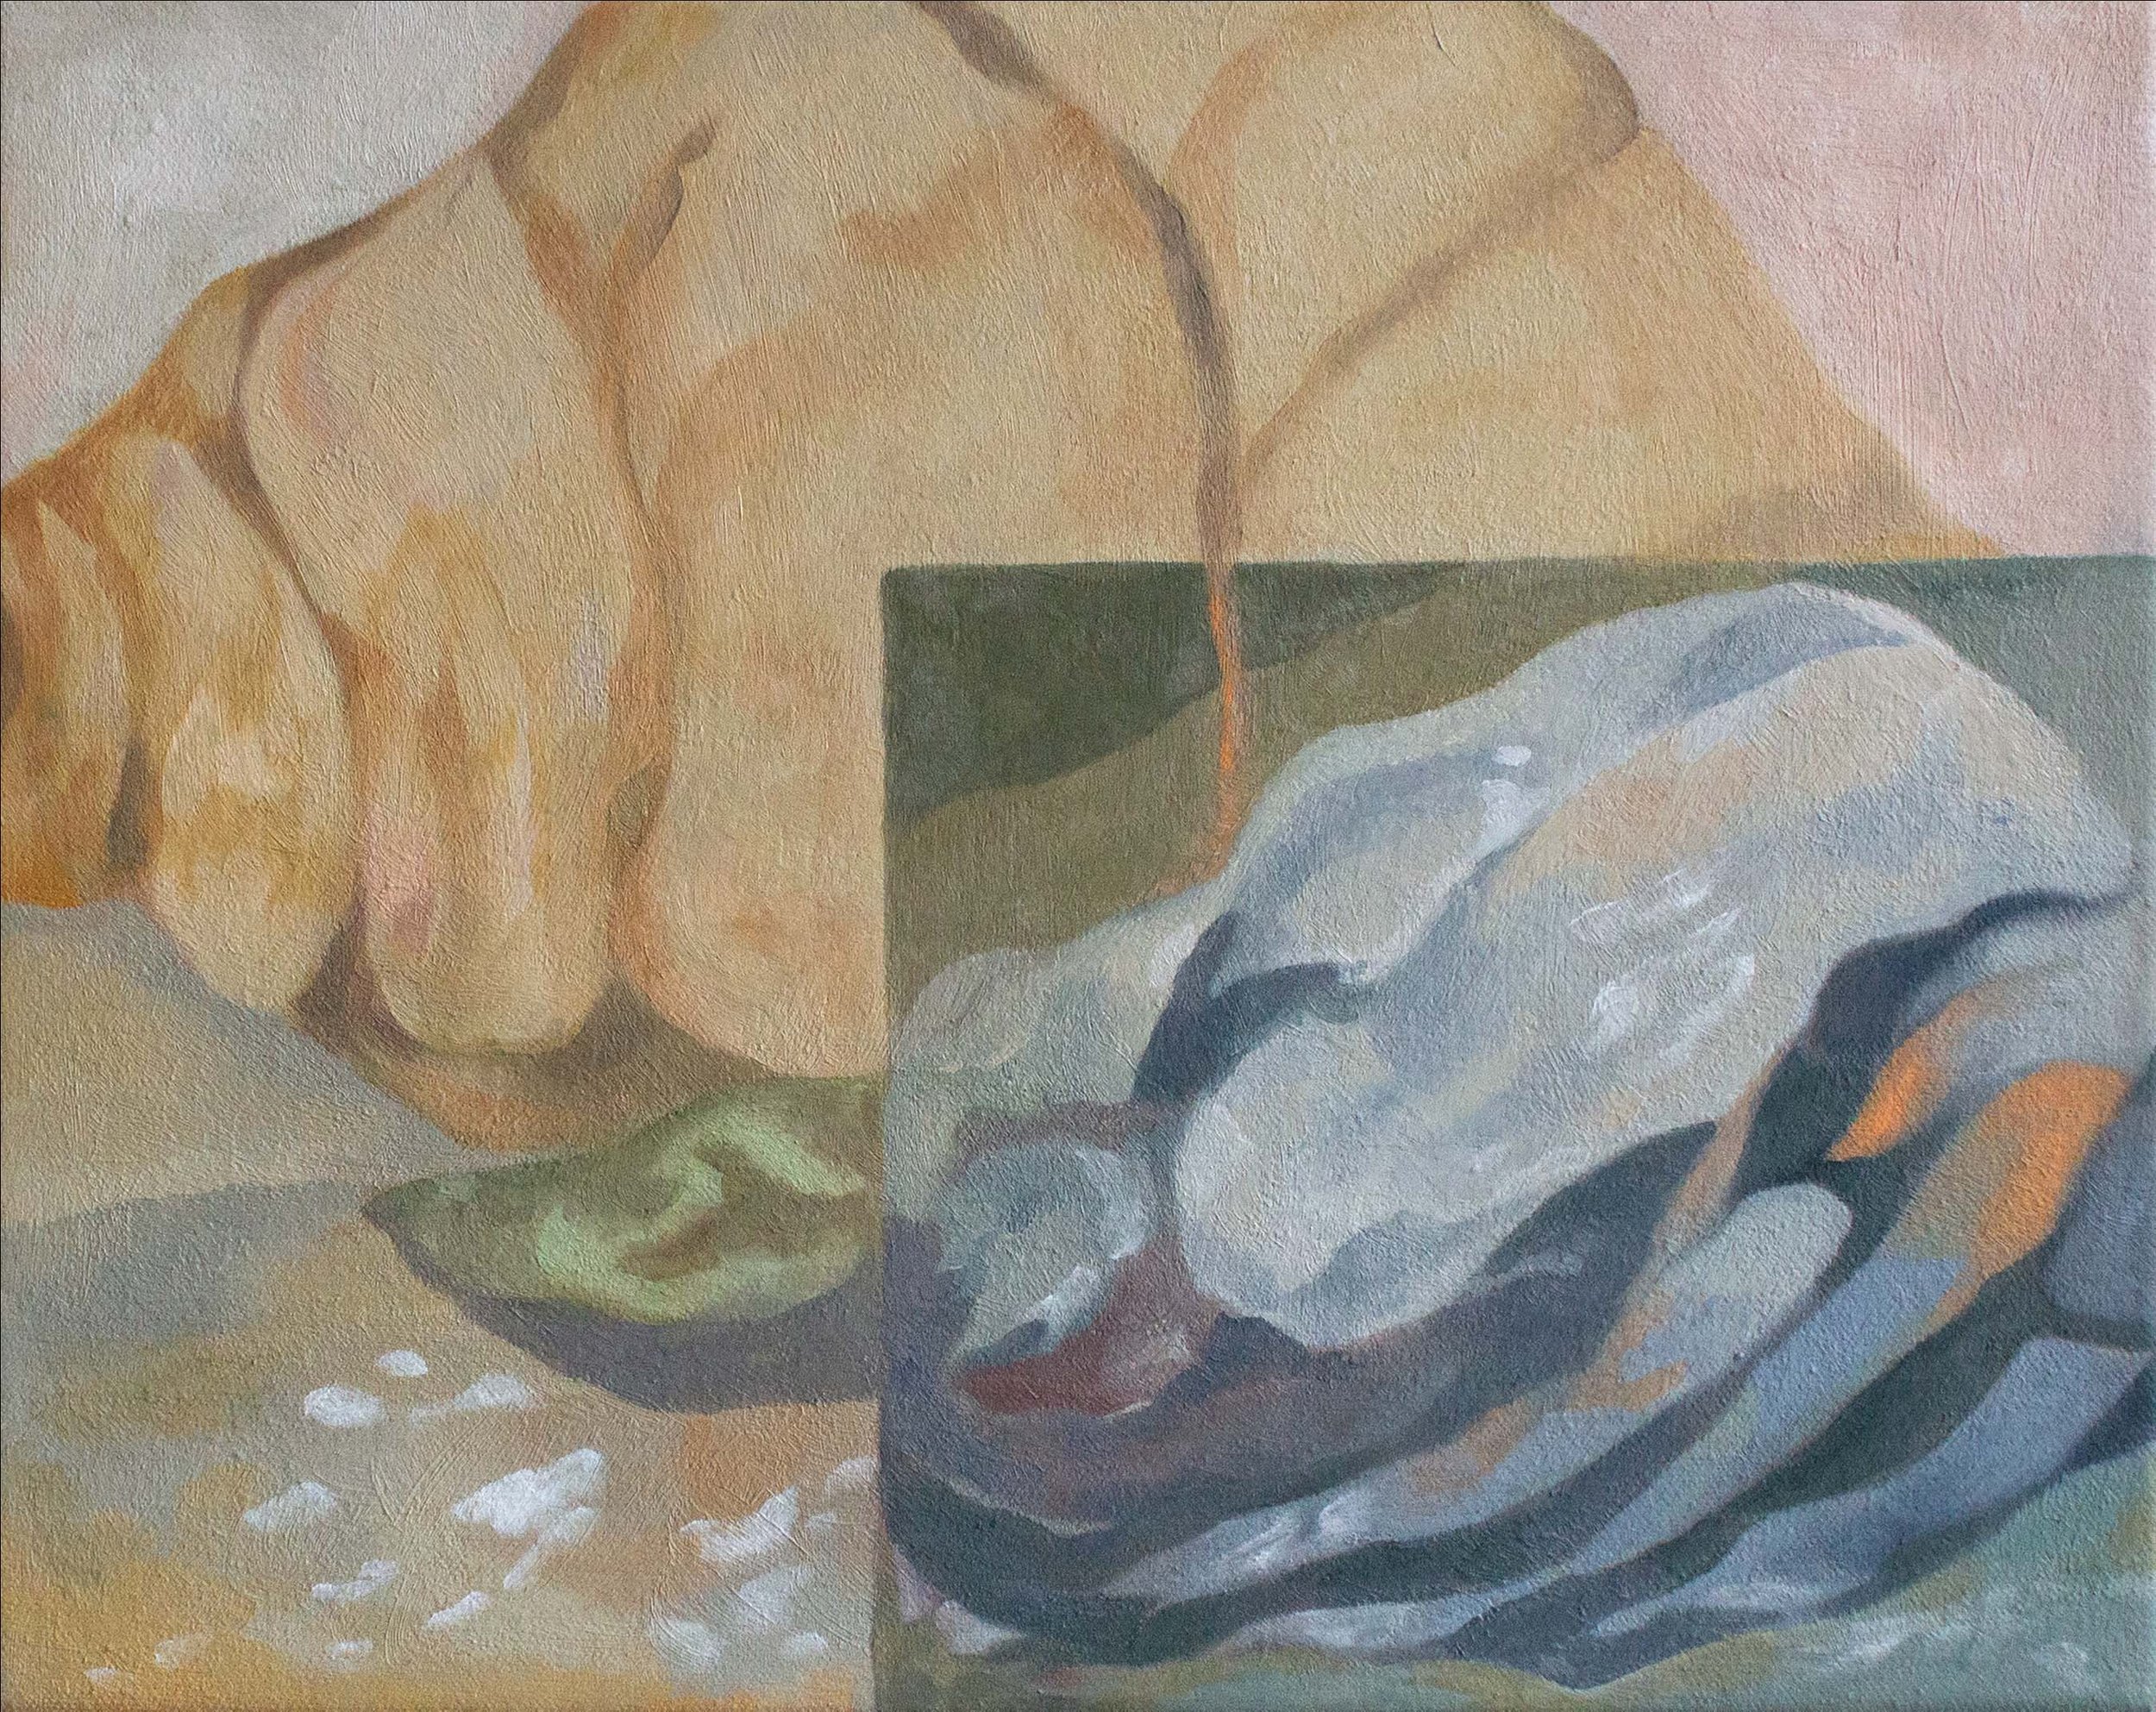   Shell   2023, Oil on Canvas,  10”x8” 